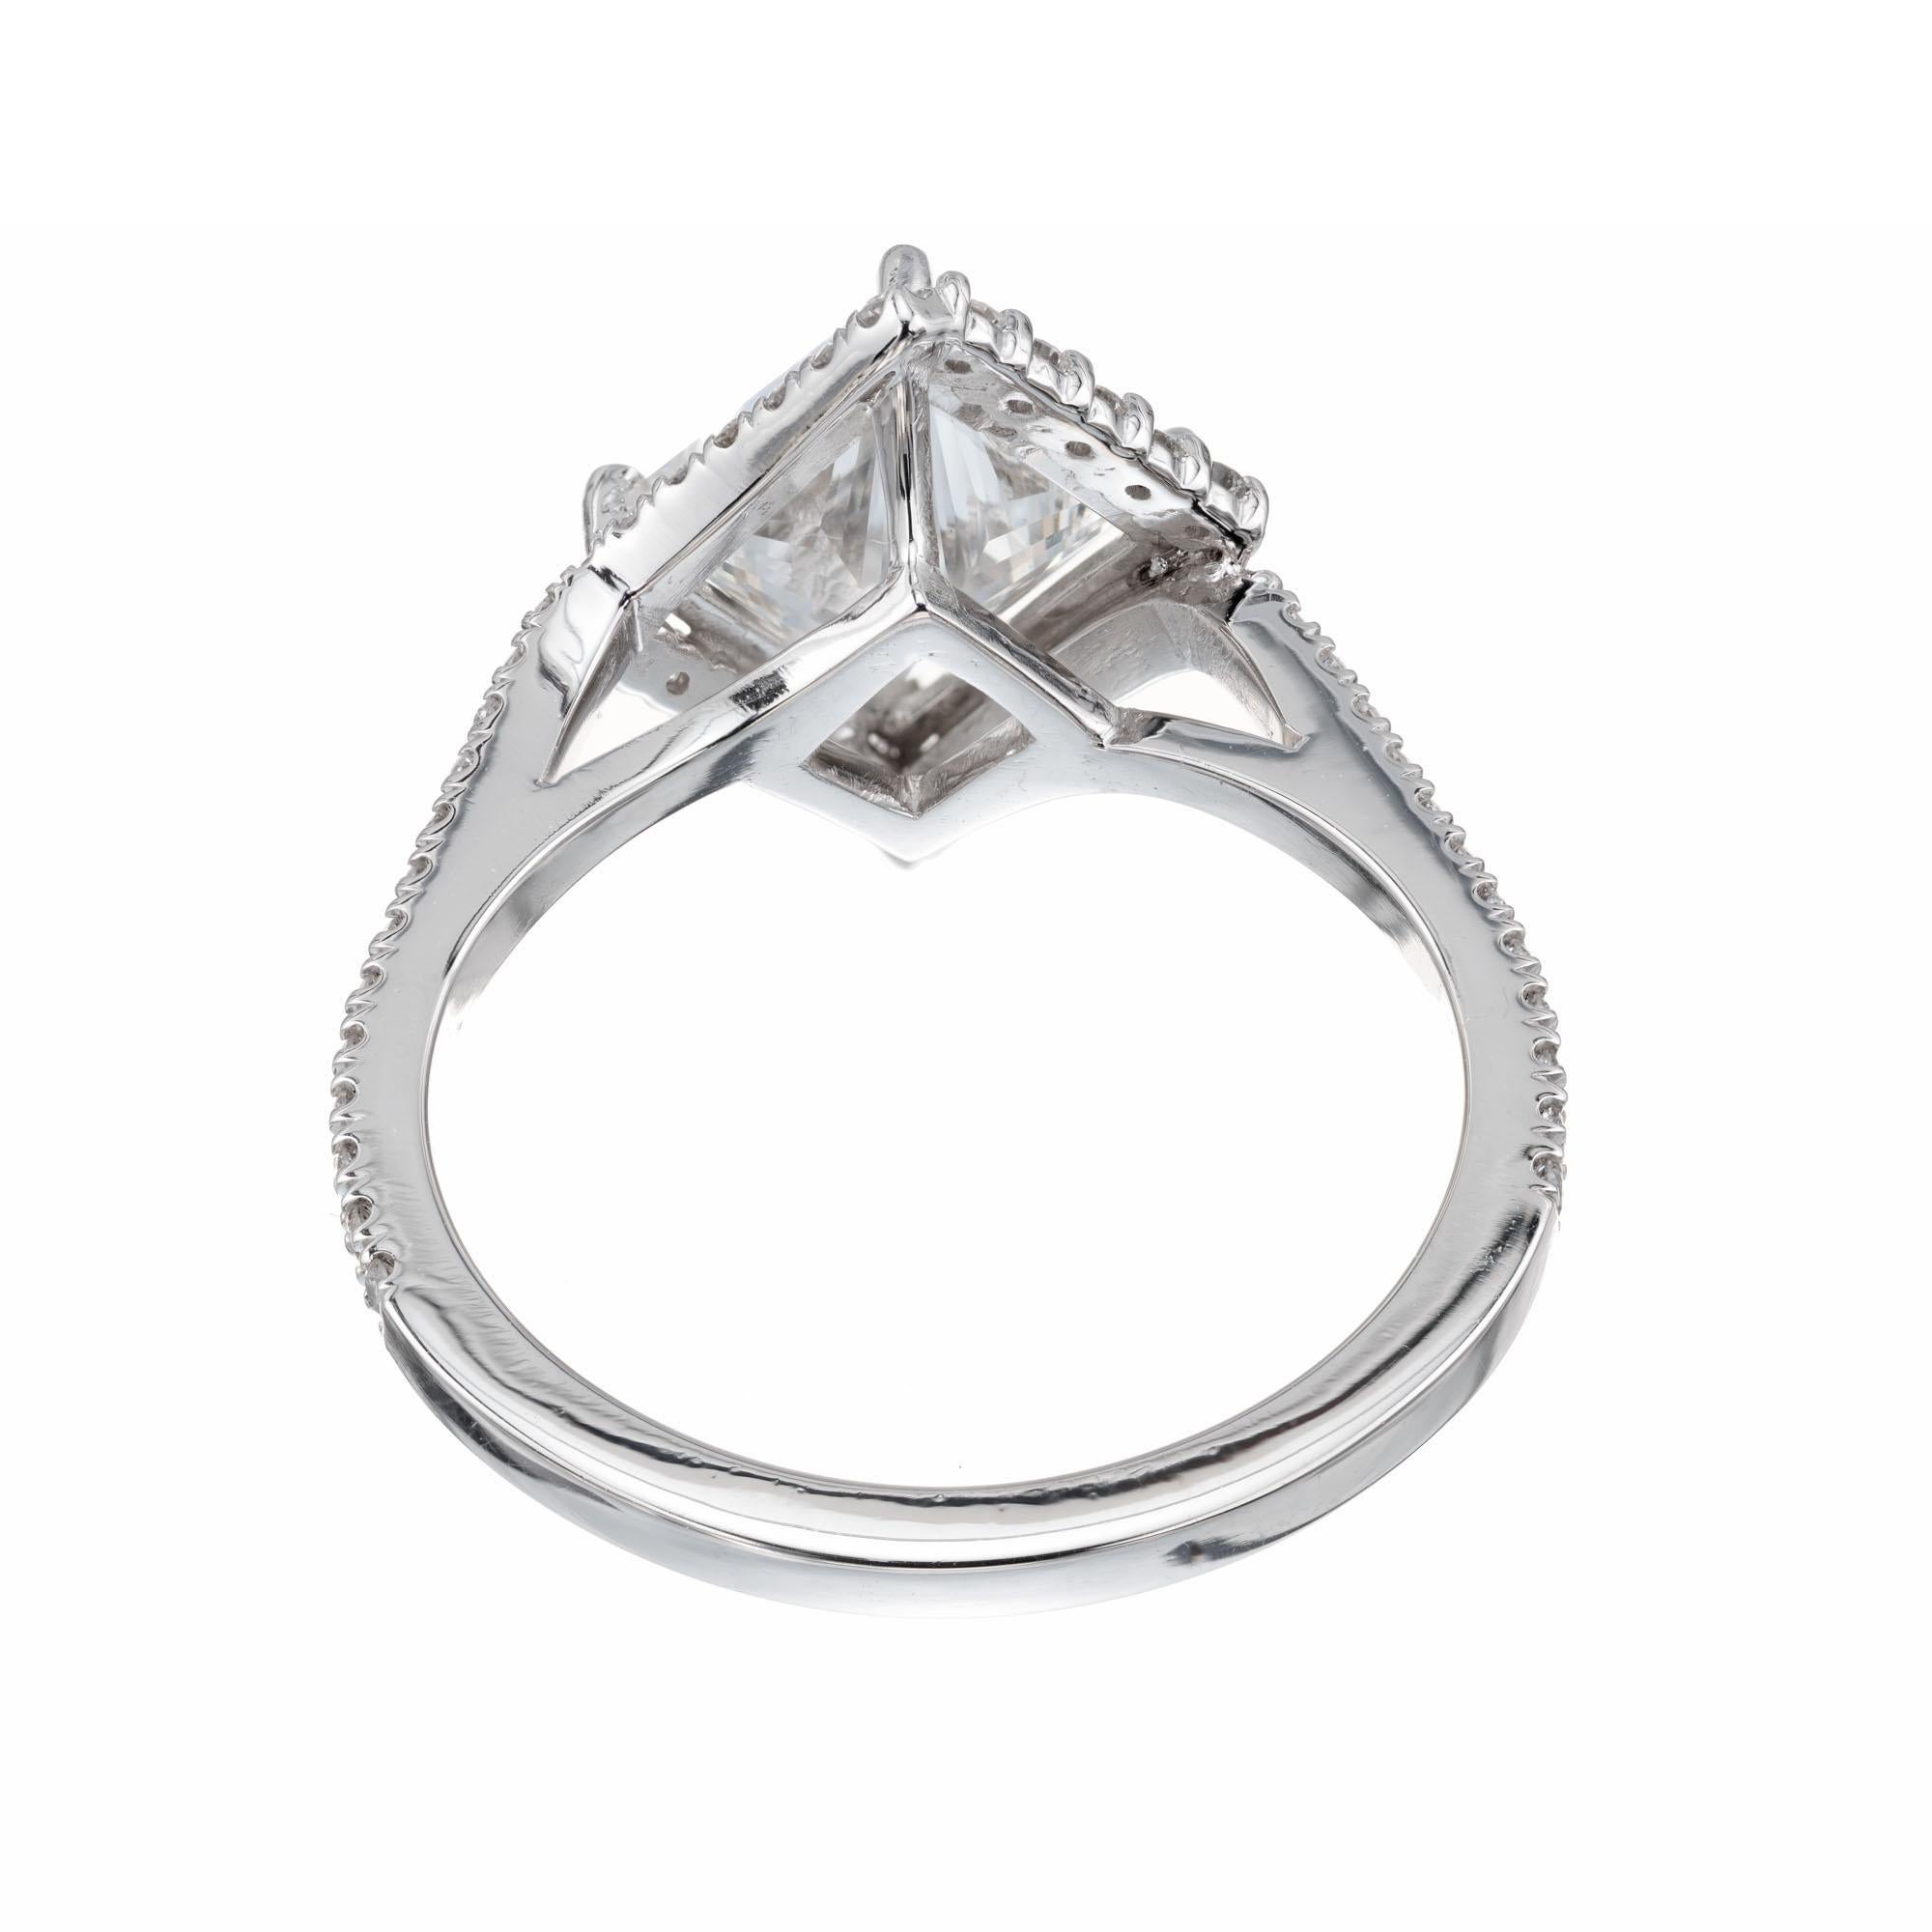 Peter Suchy GIA Certified 1.95 Carat Diamond Platinum Engagement Ring In New Condition For Sale In Stamford, CT